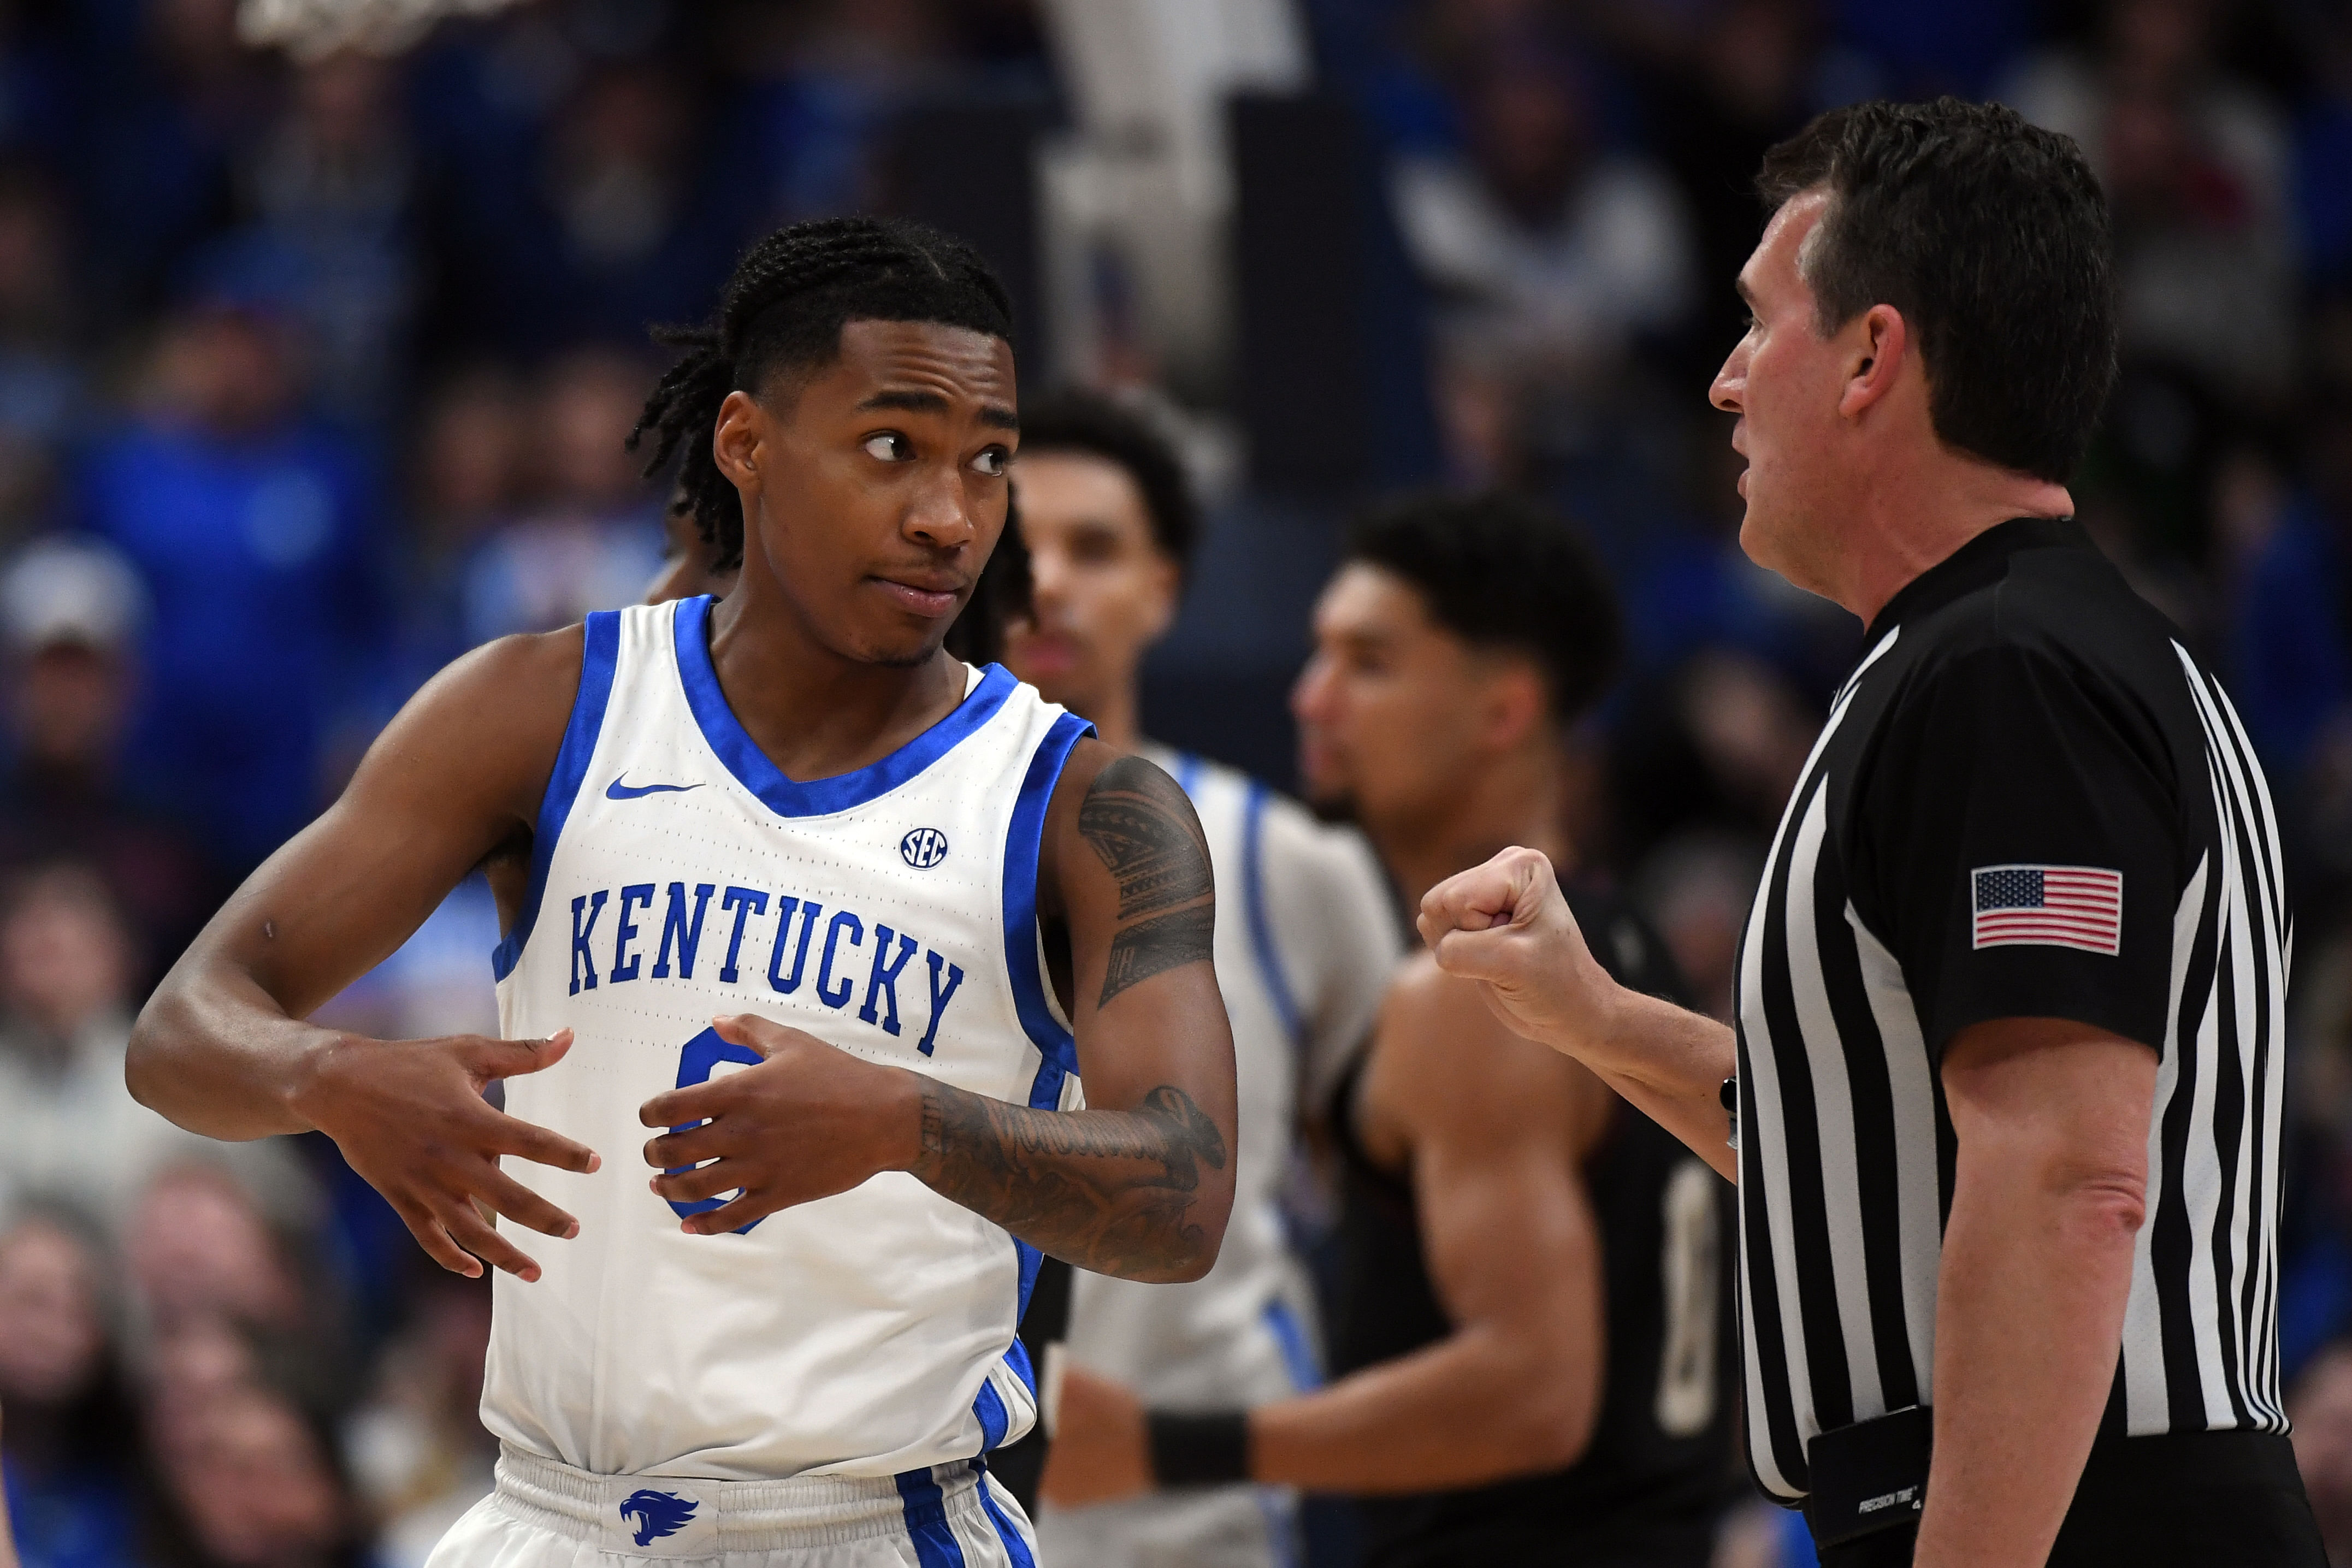 Kentucky guard Rob Dillingham is likely to be the highest NBA Draft pick of players who wore No. 0 last year in college basketball.